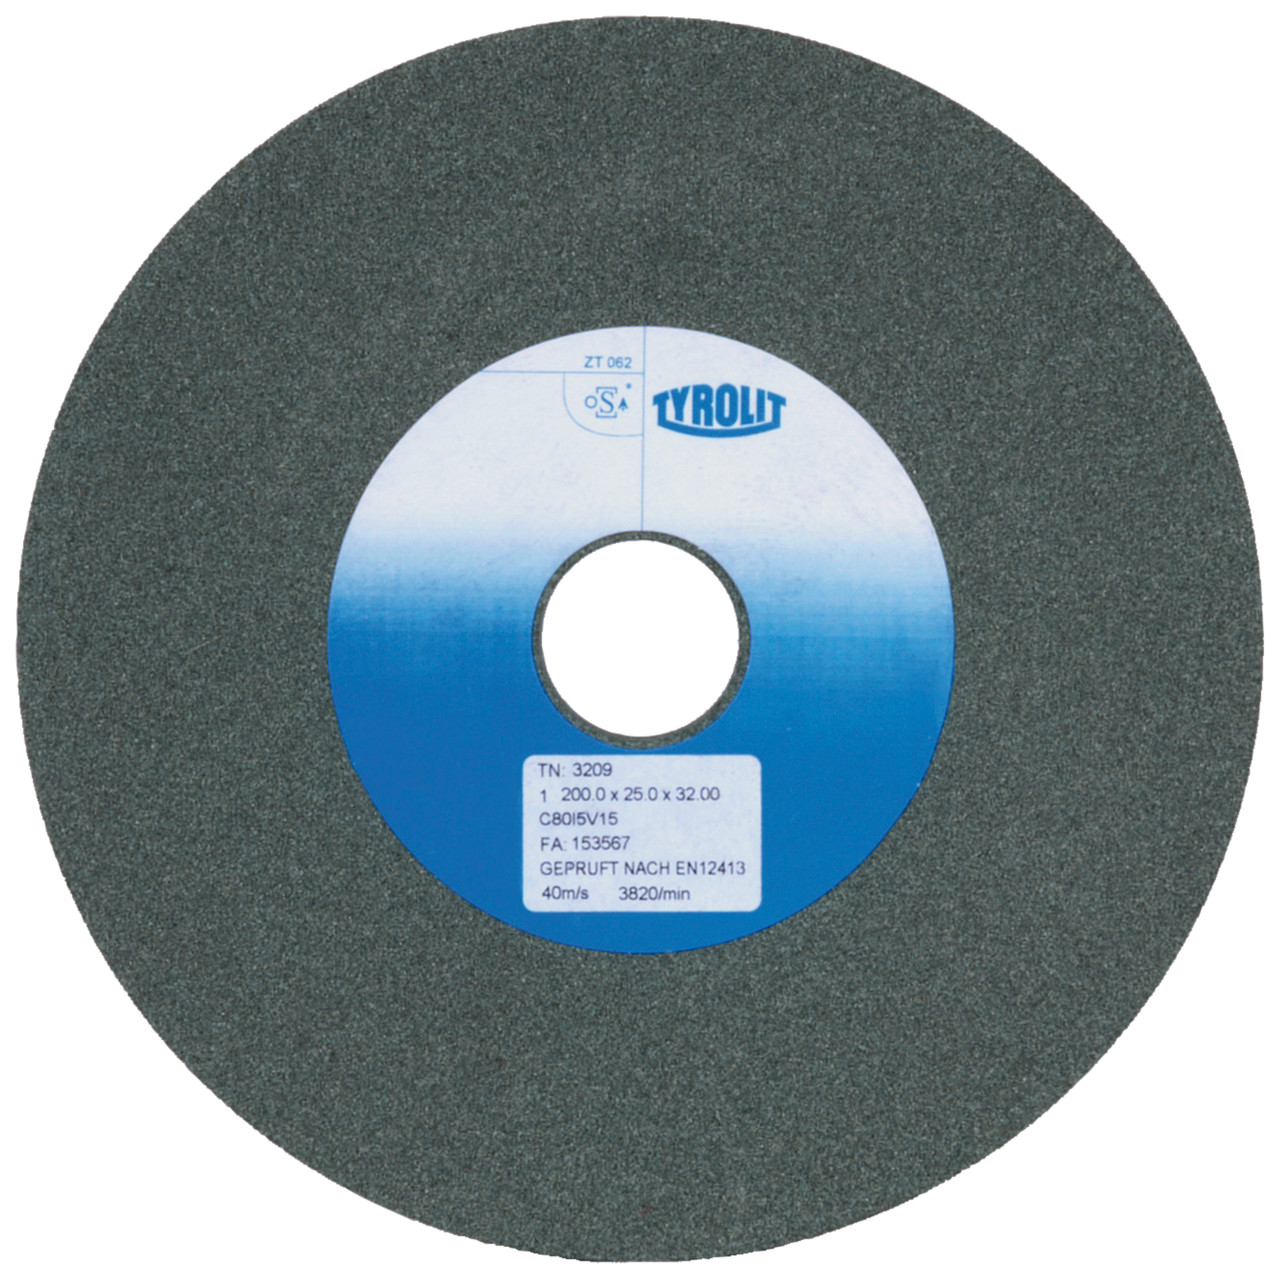 Tyrolit Conventional ceramic grinding discs DxDxH 300x40x76 For carbide and cast iron, shape: 1, Art. 9652